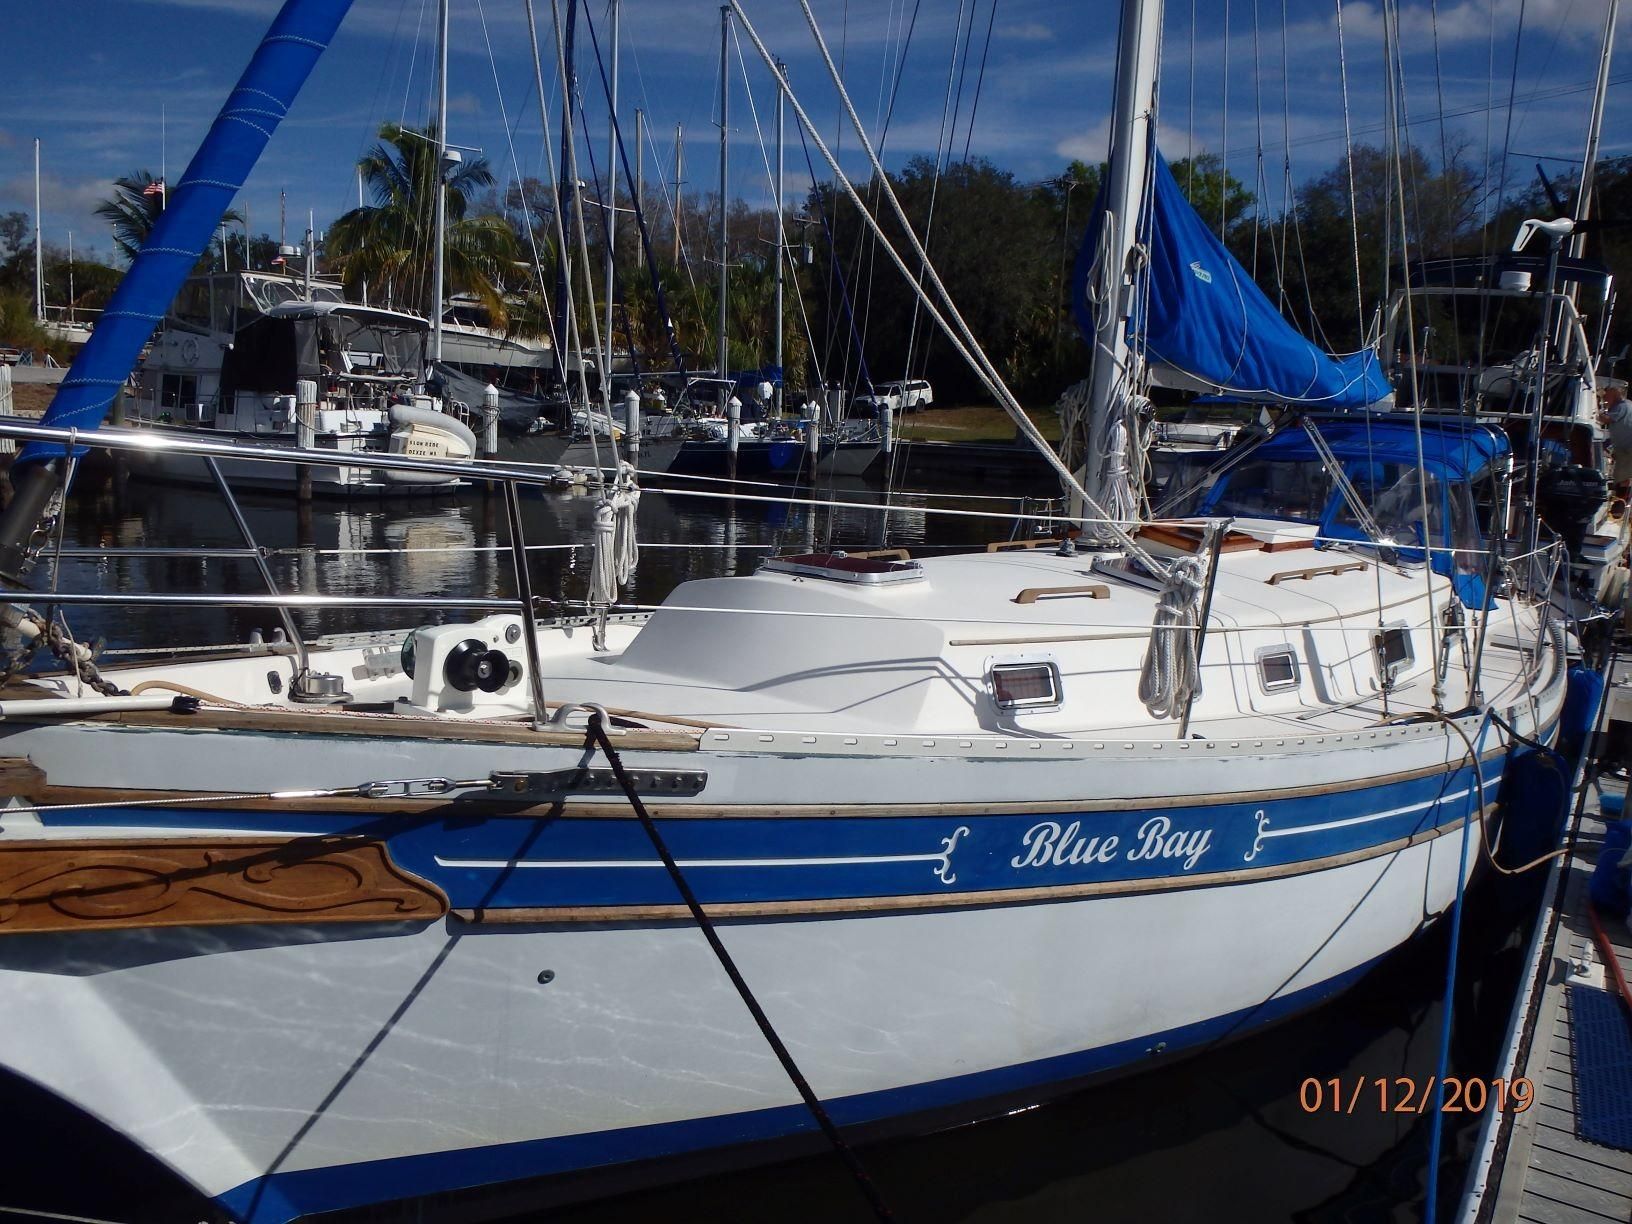 36 ft bayfield sailboat for sale